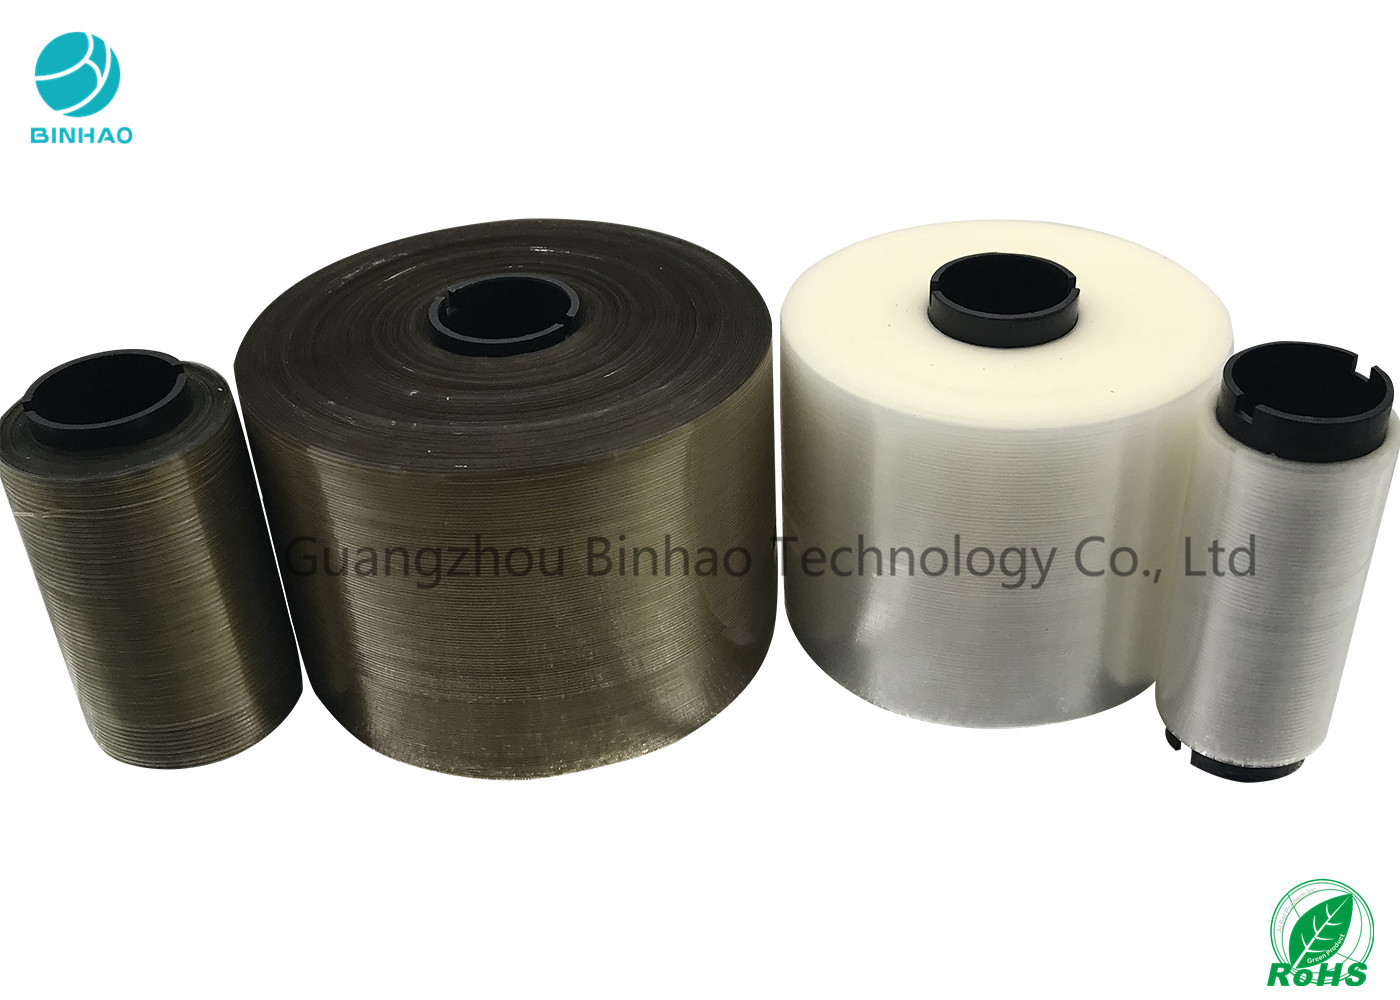 Stable Adhering Capacity Tear Strip Tape Recyclable Without Any Residue 5000m Length